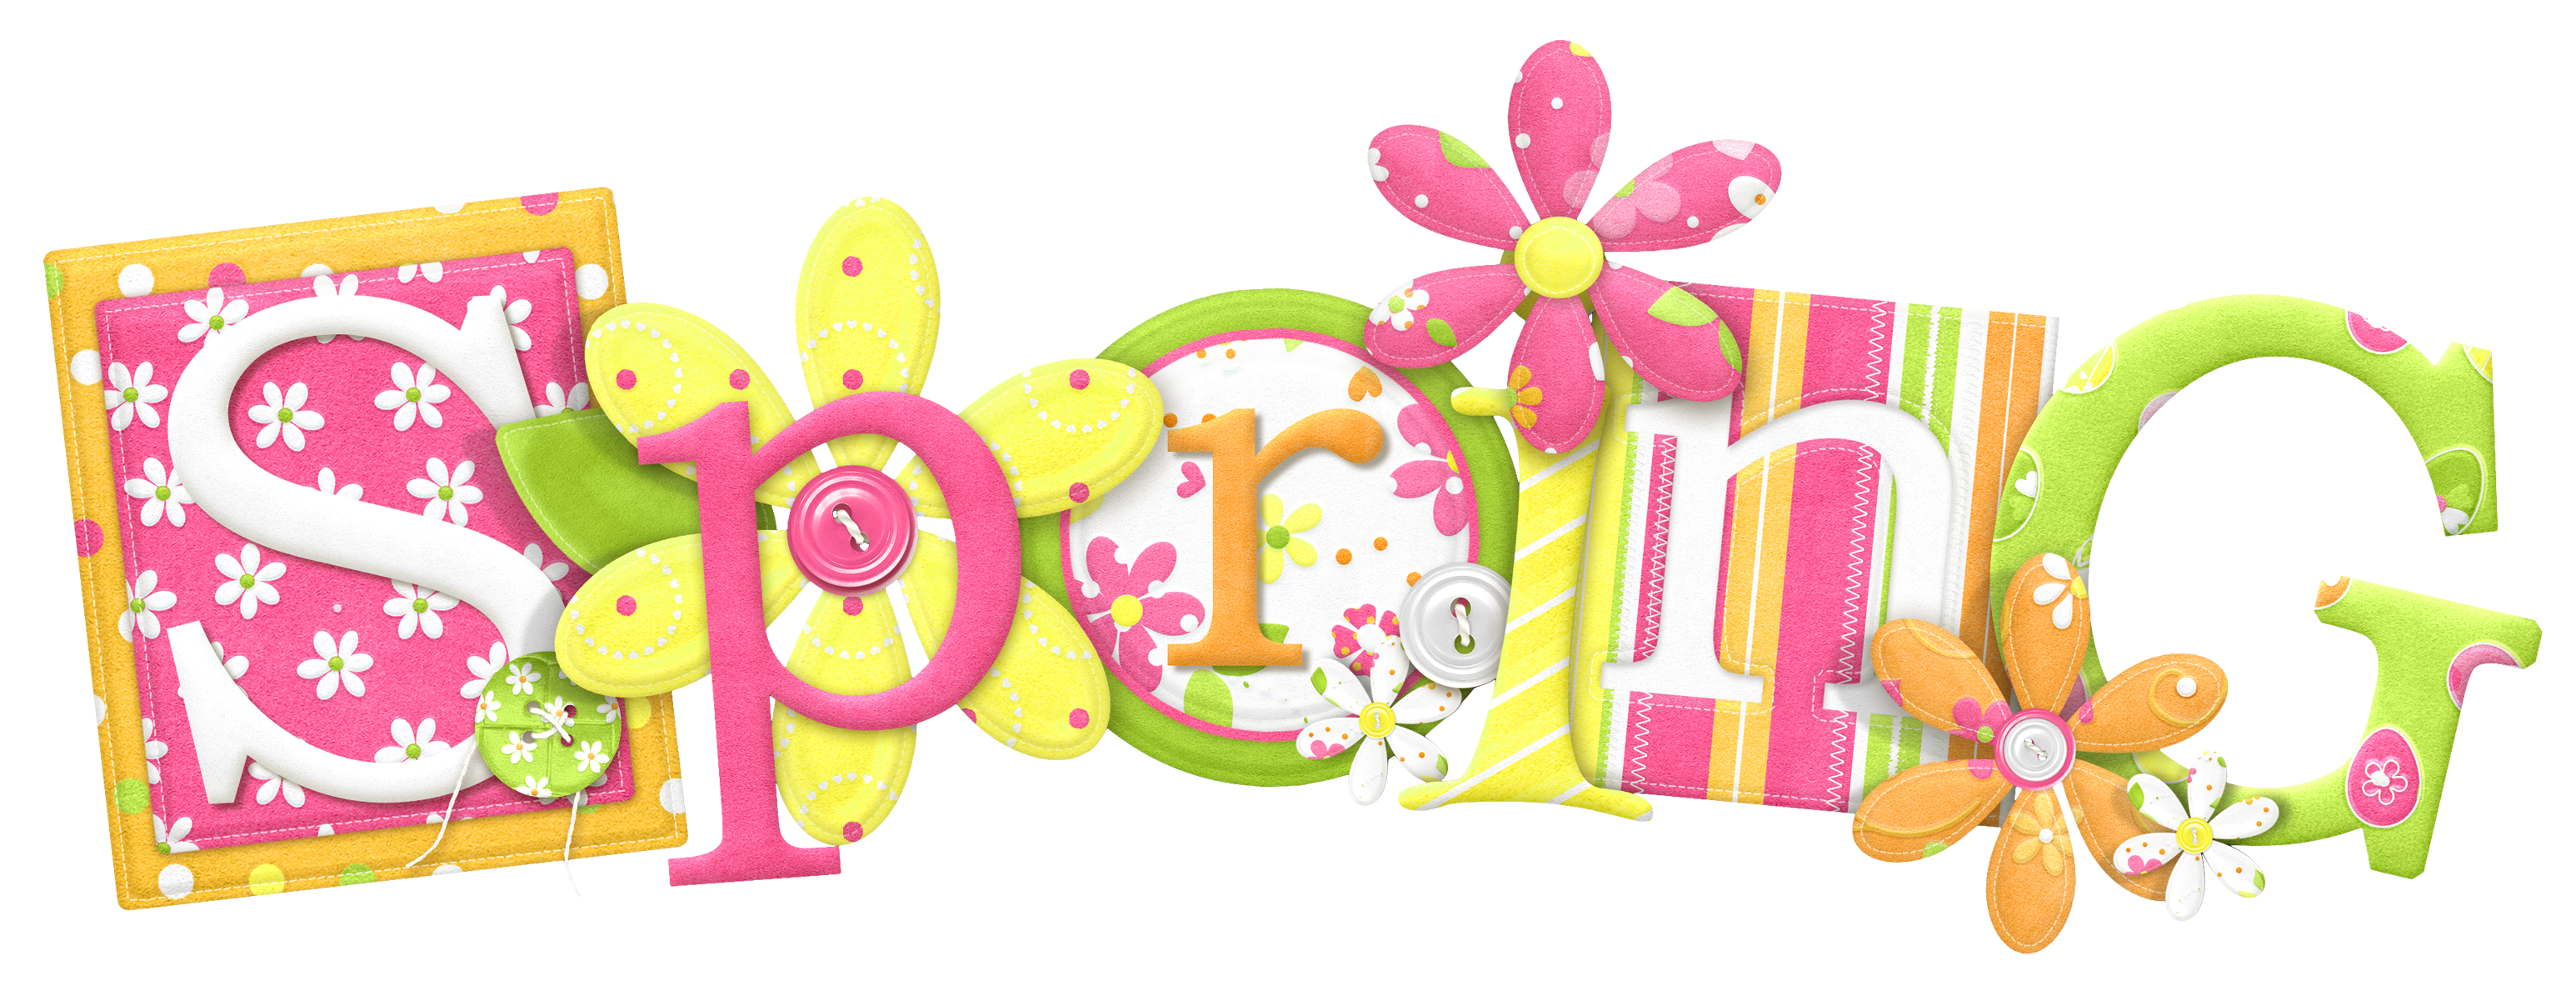 Free Spring Clipart - clipart - Spring Clip Art